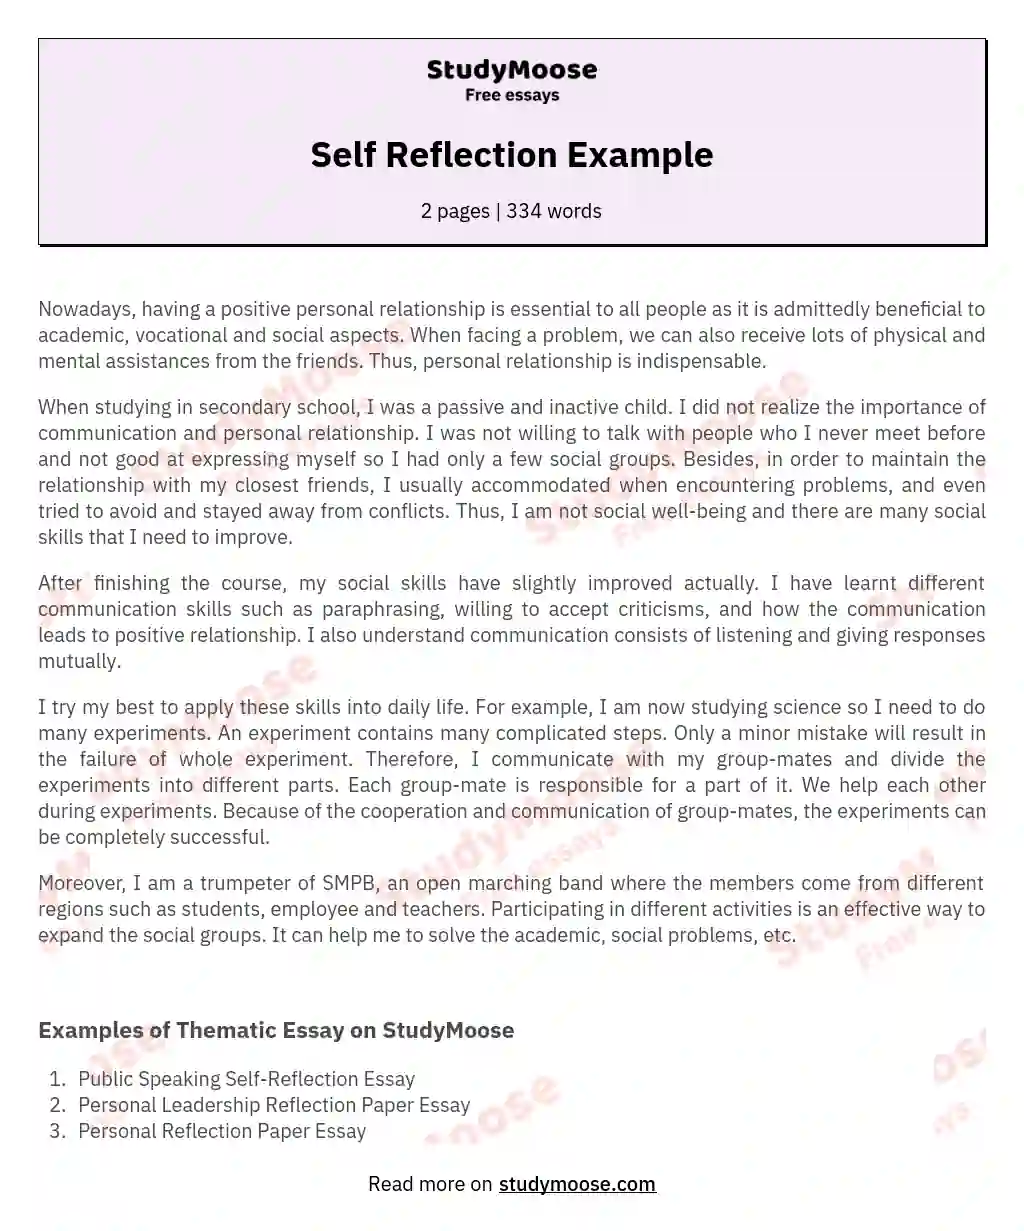 Self Reflection Example essay